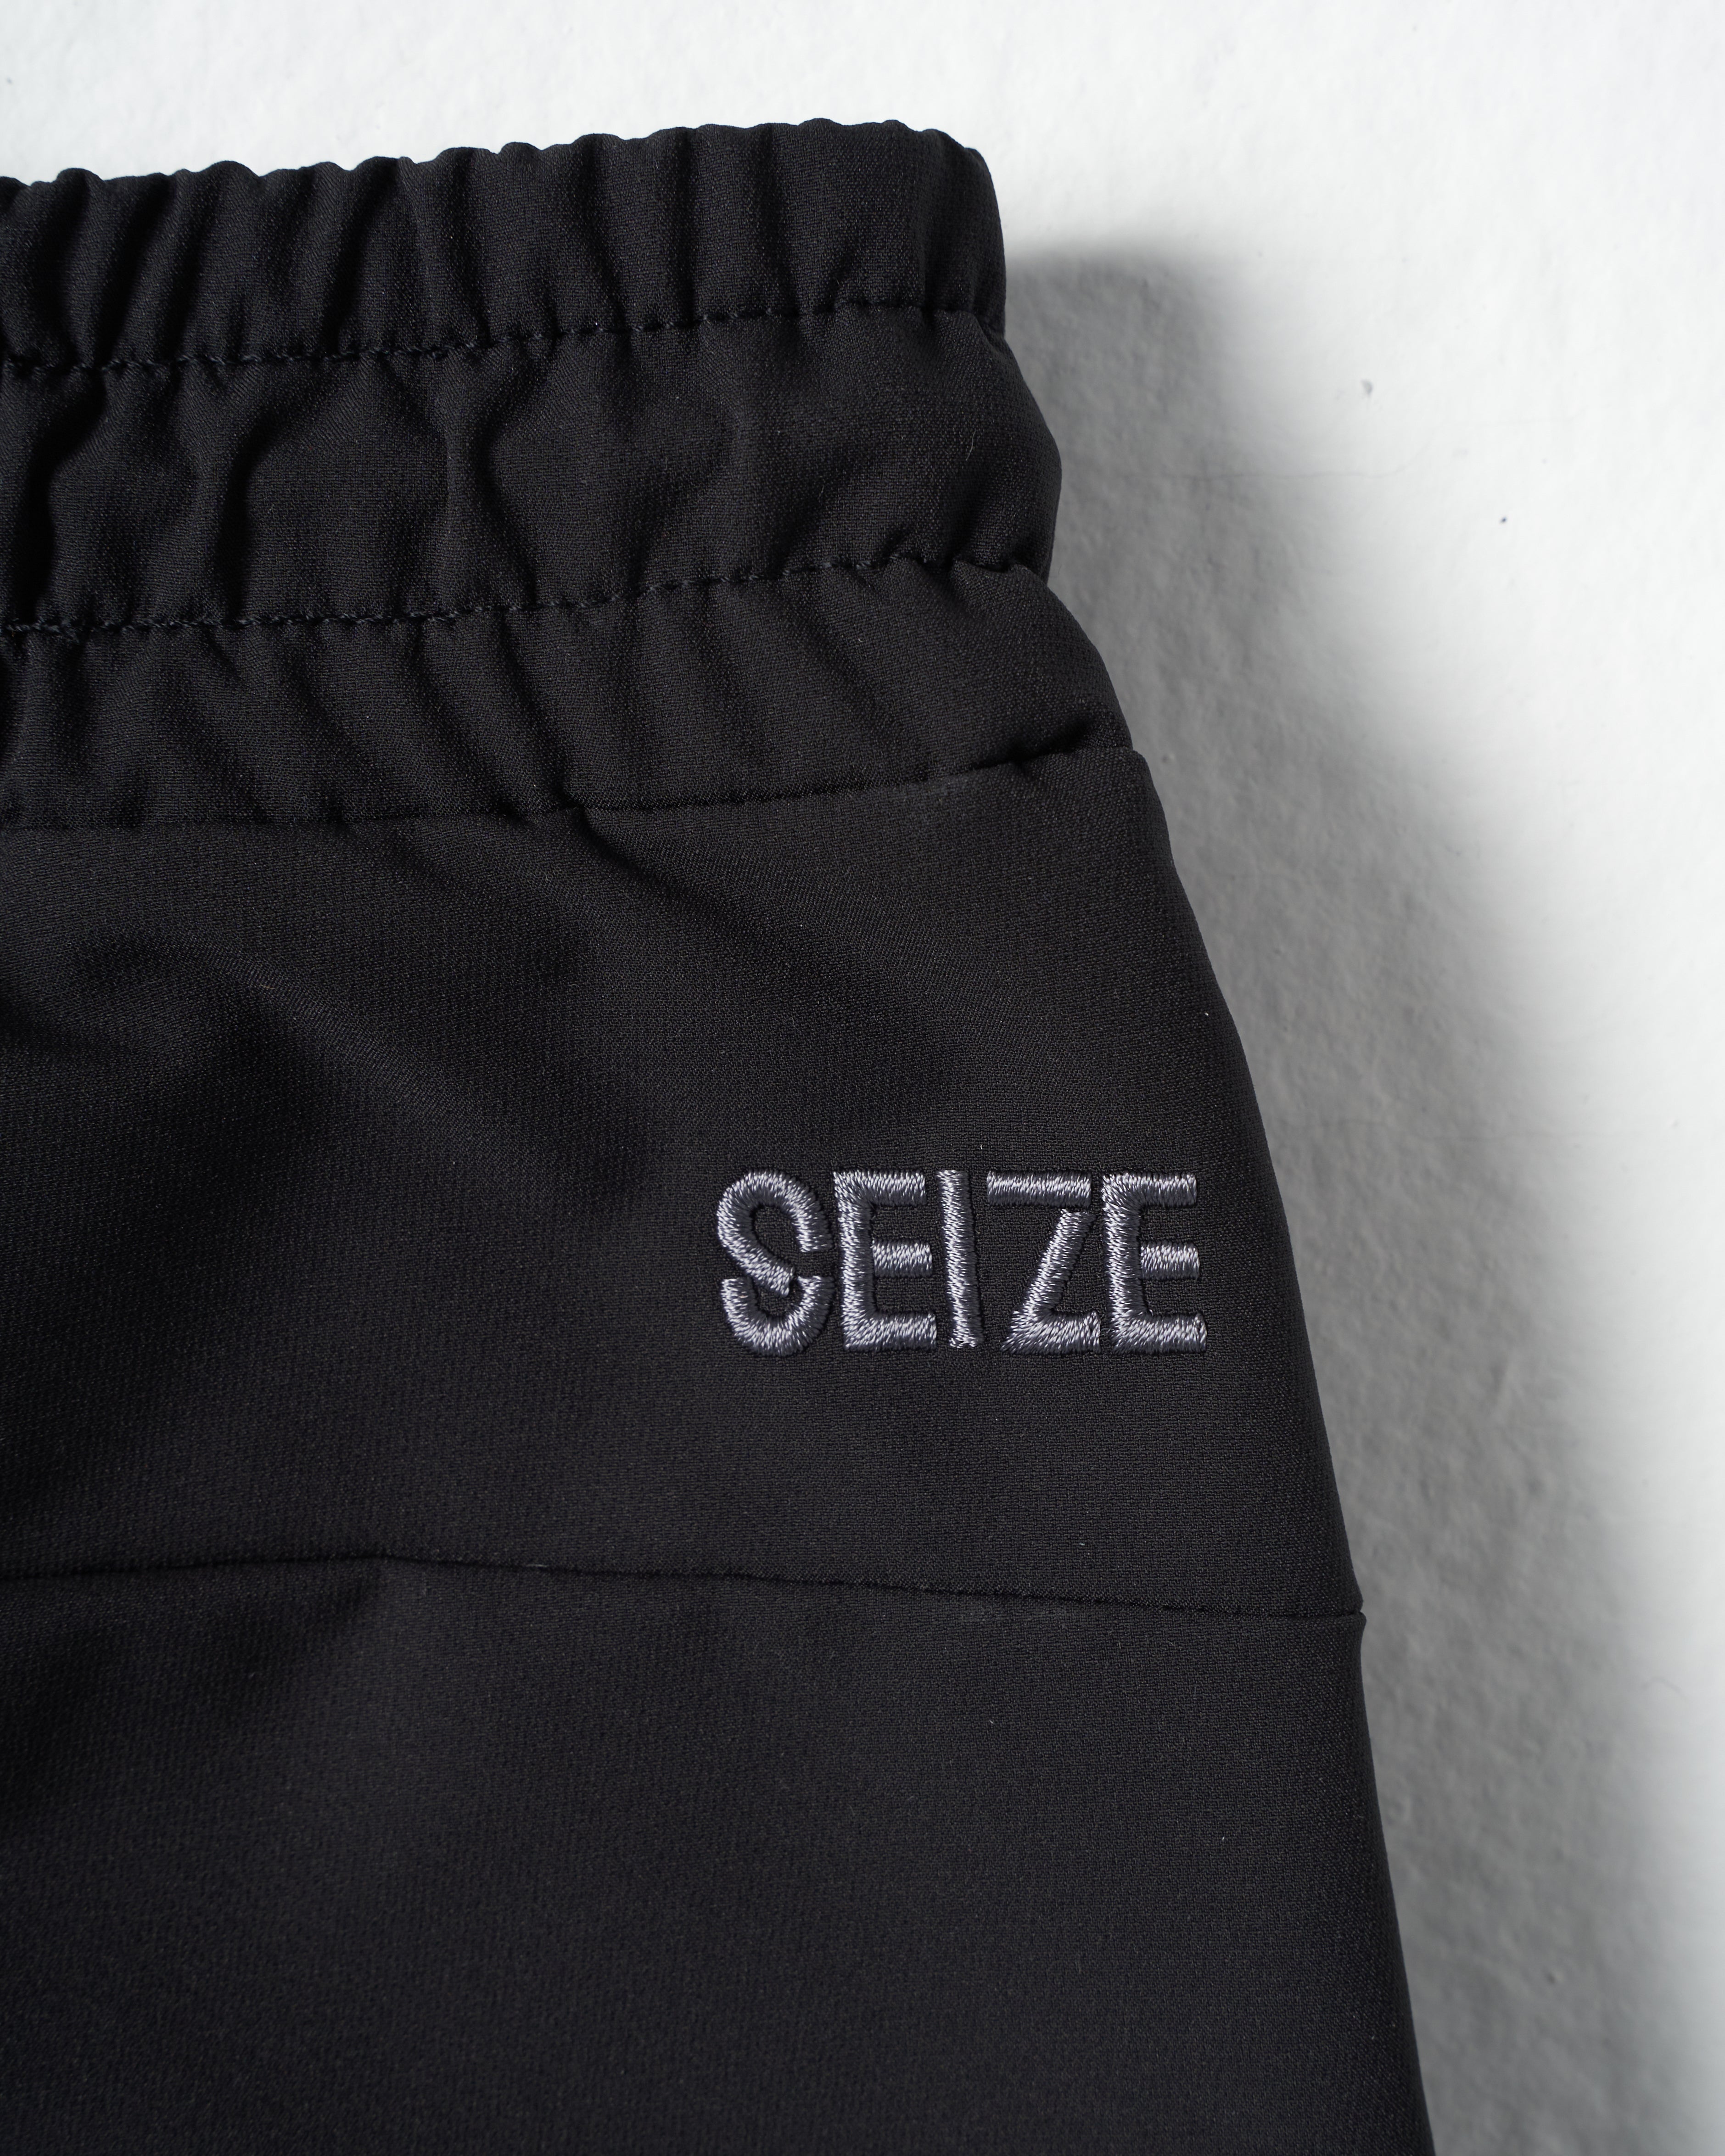 SEIZE 23AW - TECH TAPERED EASY PANTS V2 - INK GREY